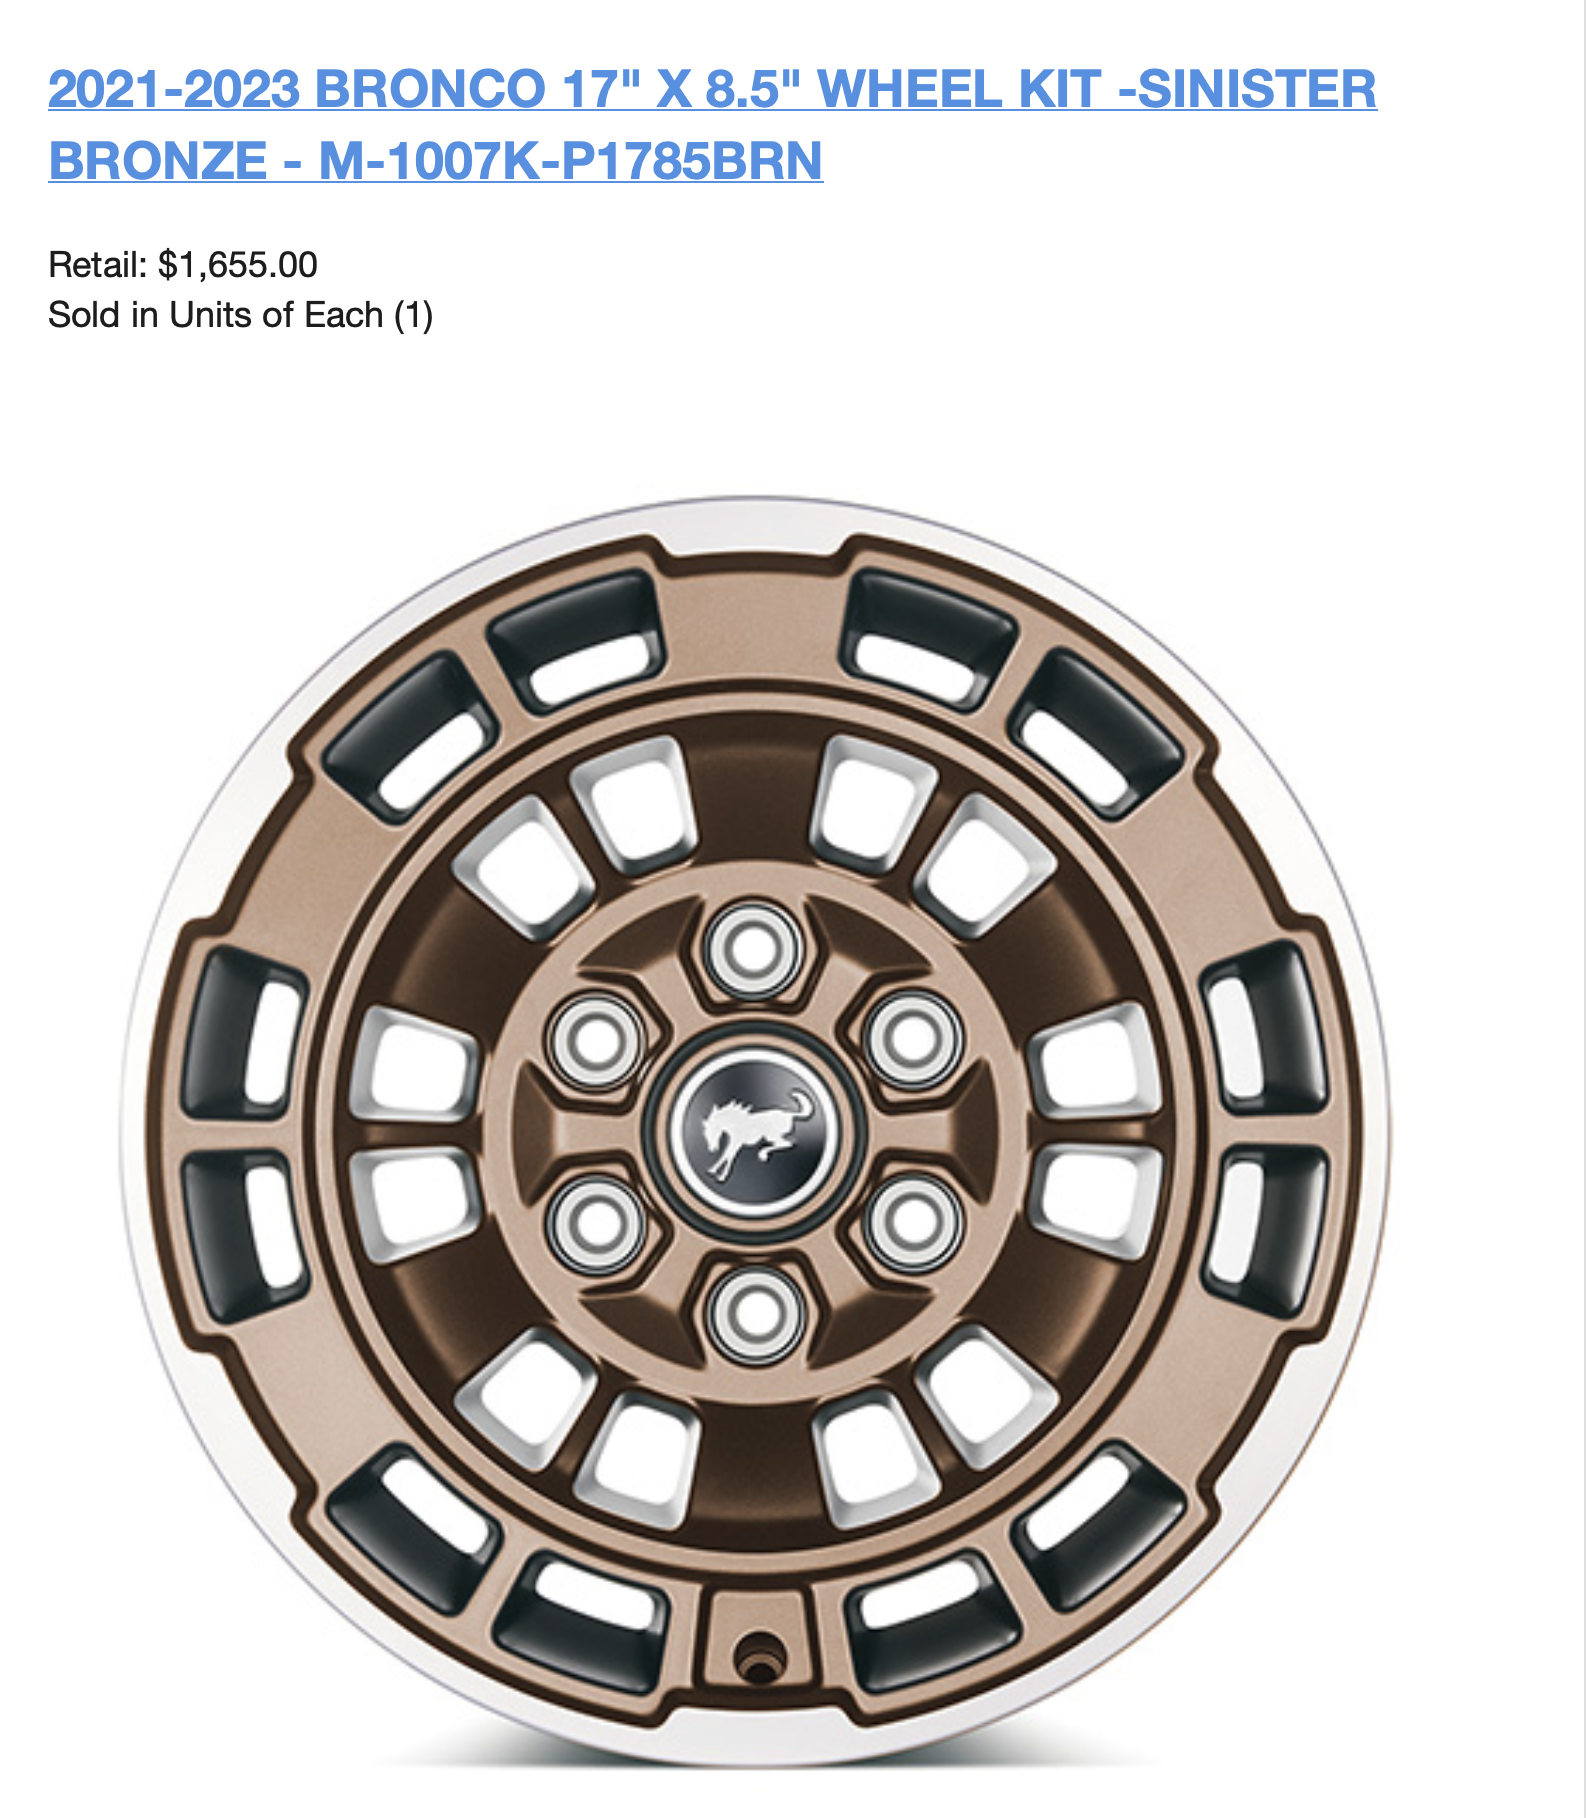 Ford Bronco New 17" Sinister Bronze Wheels Kit from Ford Performance for Bronco Screenshot 2023-06-08 at 4.17.16 PM